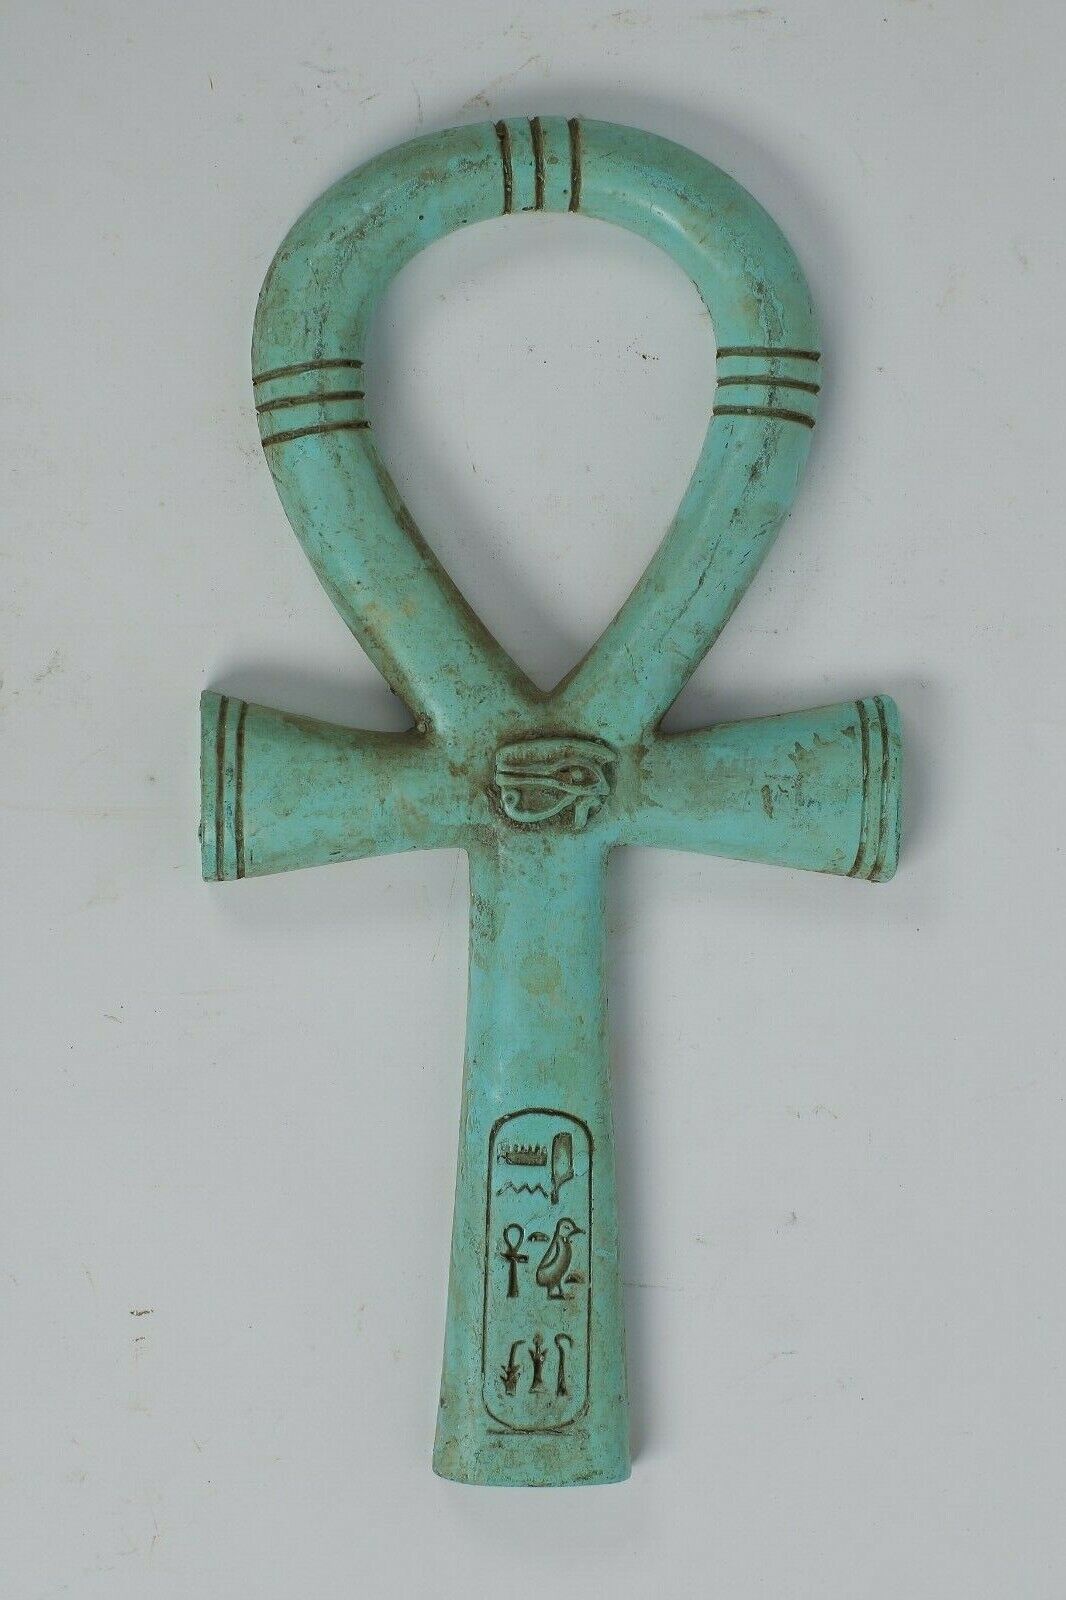 Egyptian ANKH (key of life) with the eye of Horus and the cartouche - Real stone